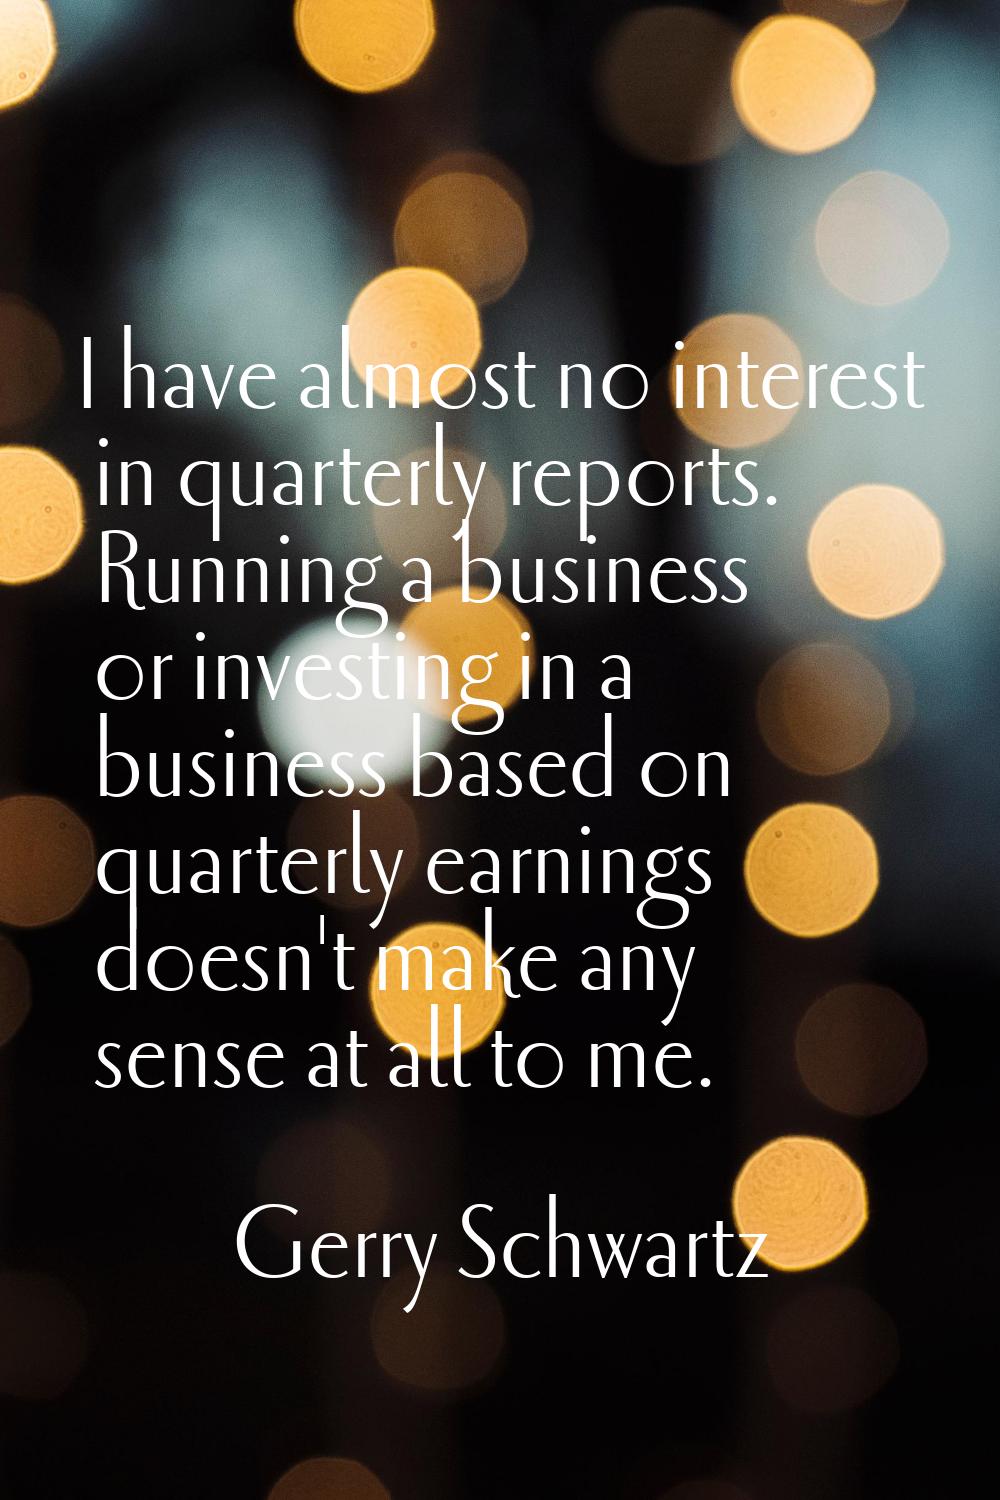 I have almost no interest in quarterly reports. Running a business or investing in a business based